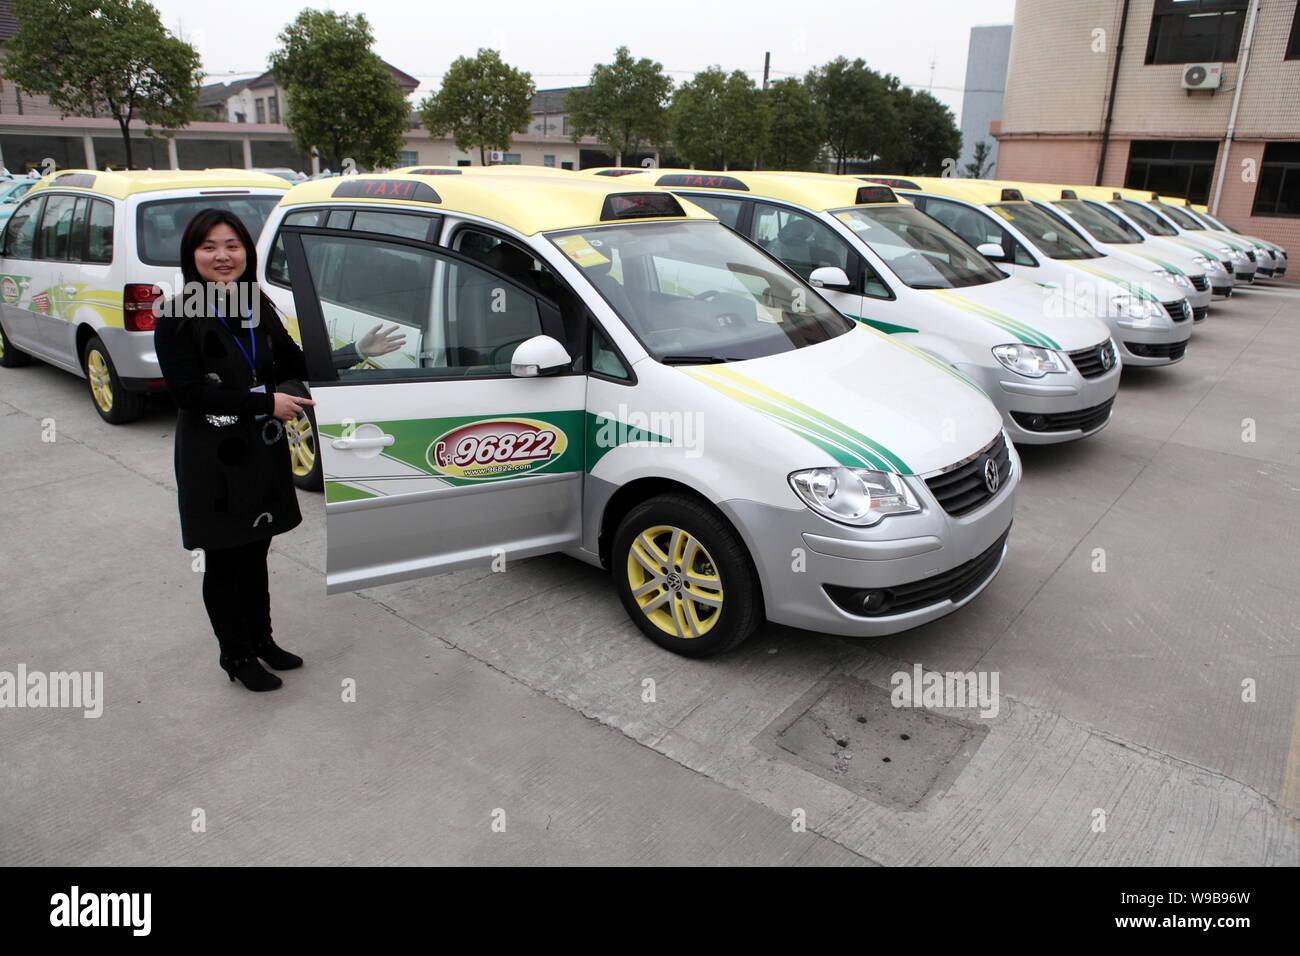 A Chinese woman stands next to Volkswagen Touran taxis for the Expo 2010 lined up at a parking lot in Shanghai, China, 22 March 2010.   Shanghai has f Stock Photo